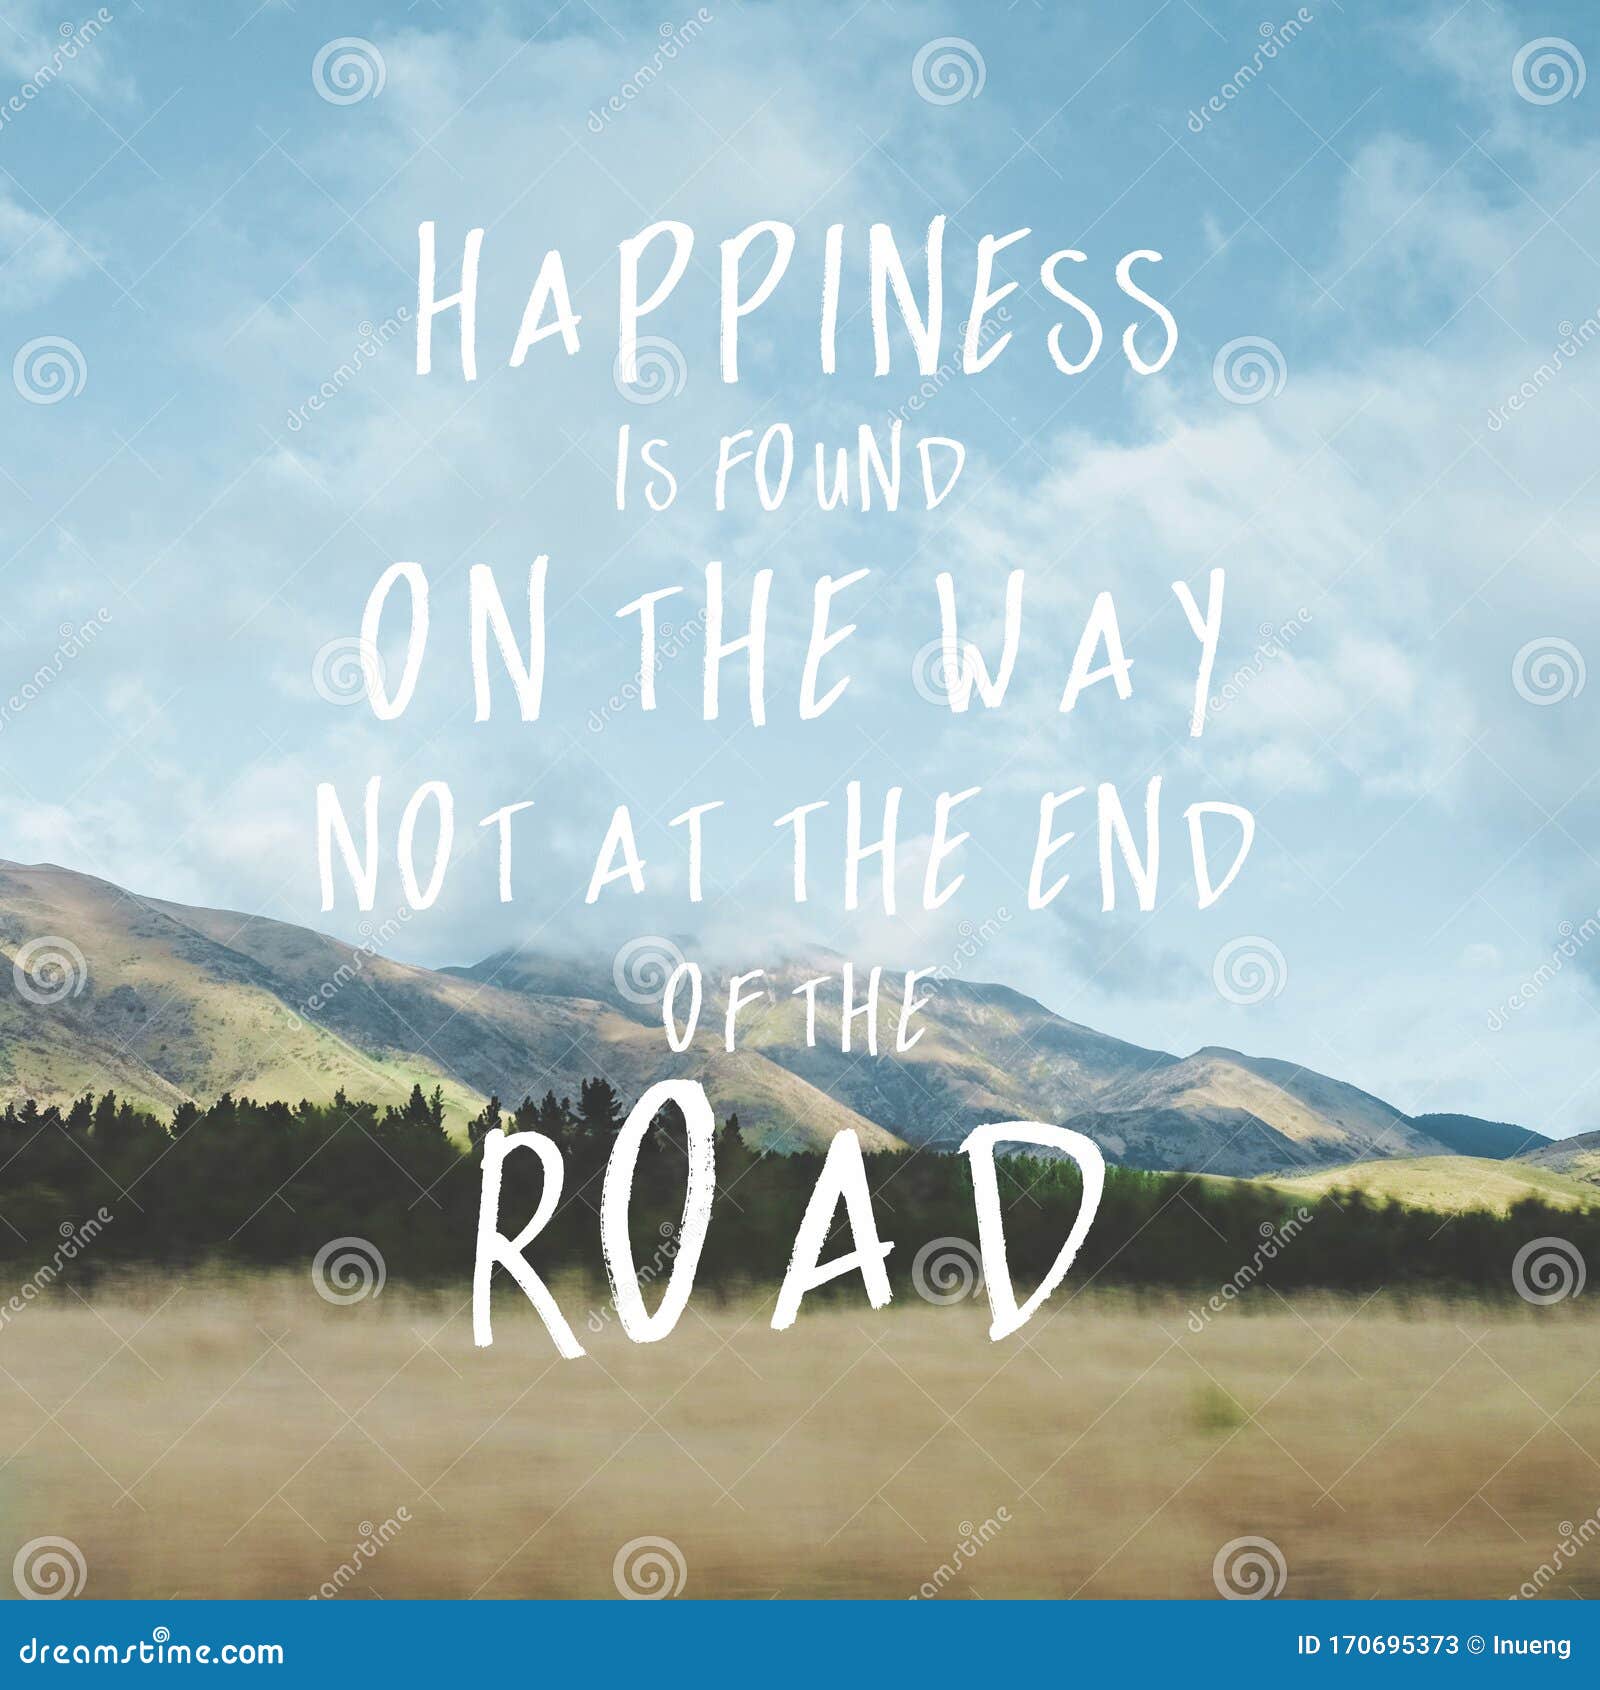 Inspirational Motivational Quote `Happiness Is Found On The Way Not At The End Of The Road.` With Mountain View Background. Stock Image - Image Of Light, Motivation: 170695373